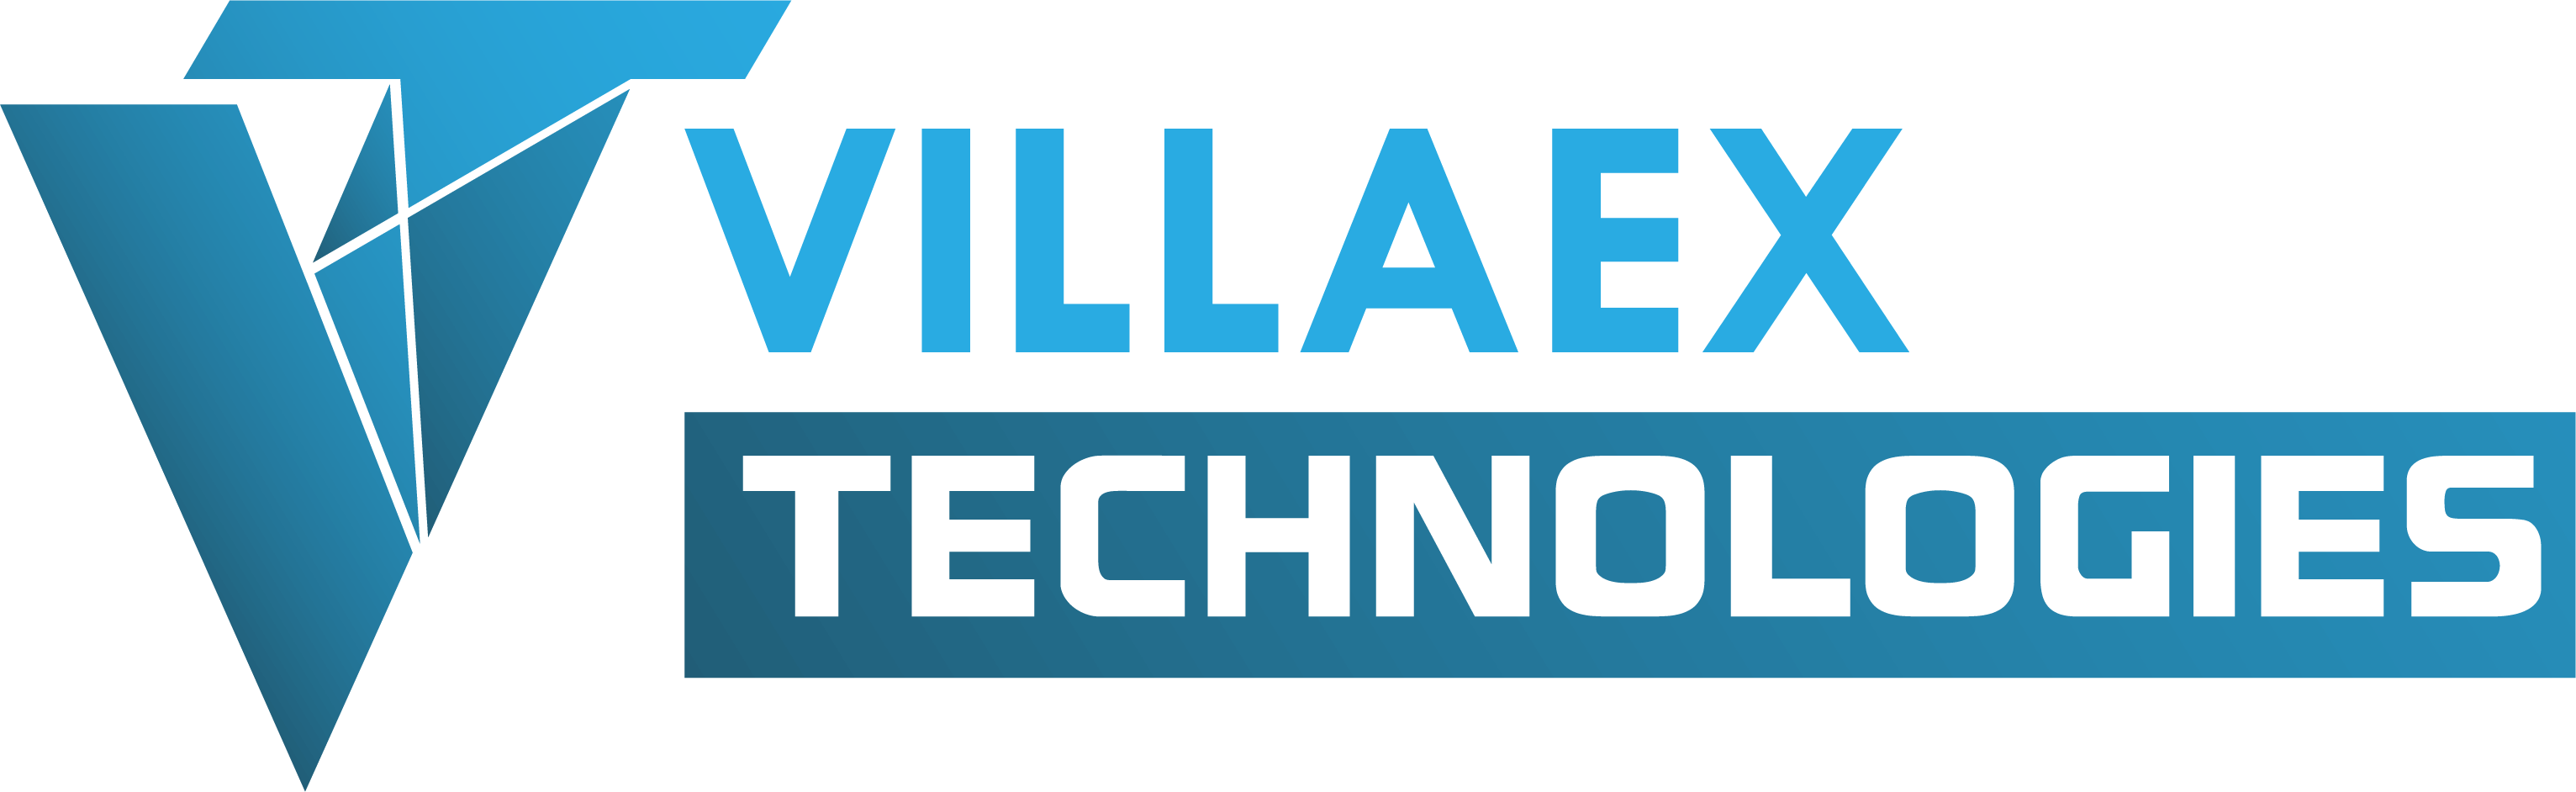 Villaex Technologies profile on Qualified.One